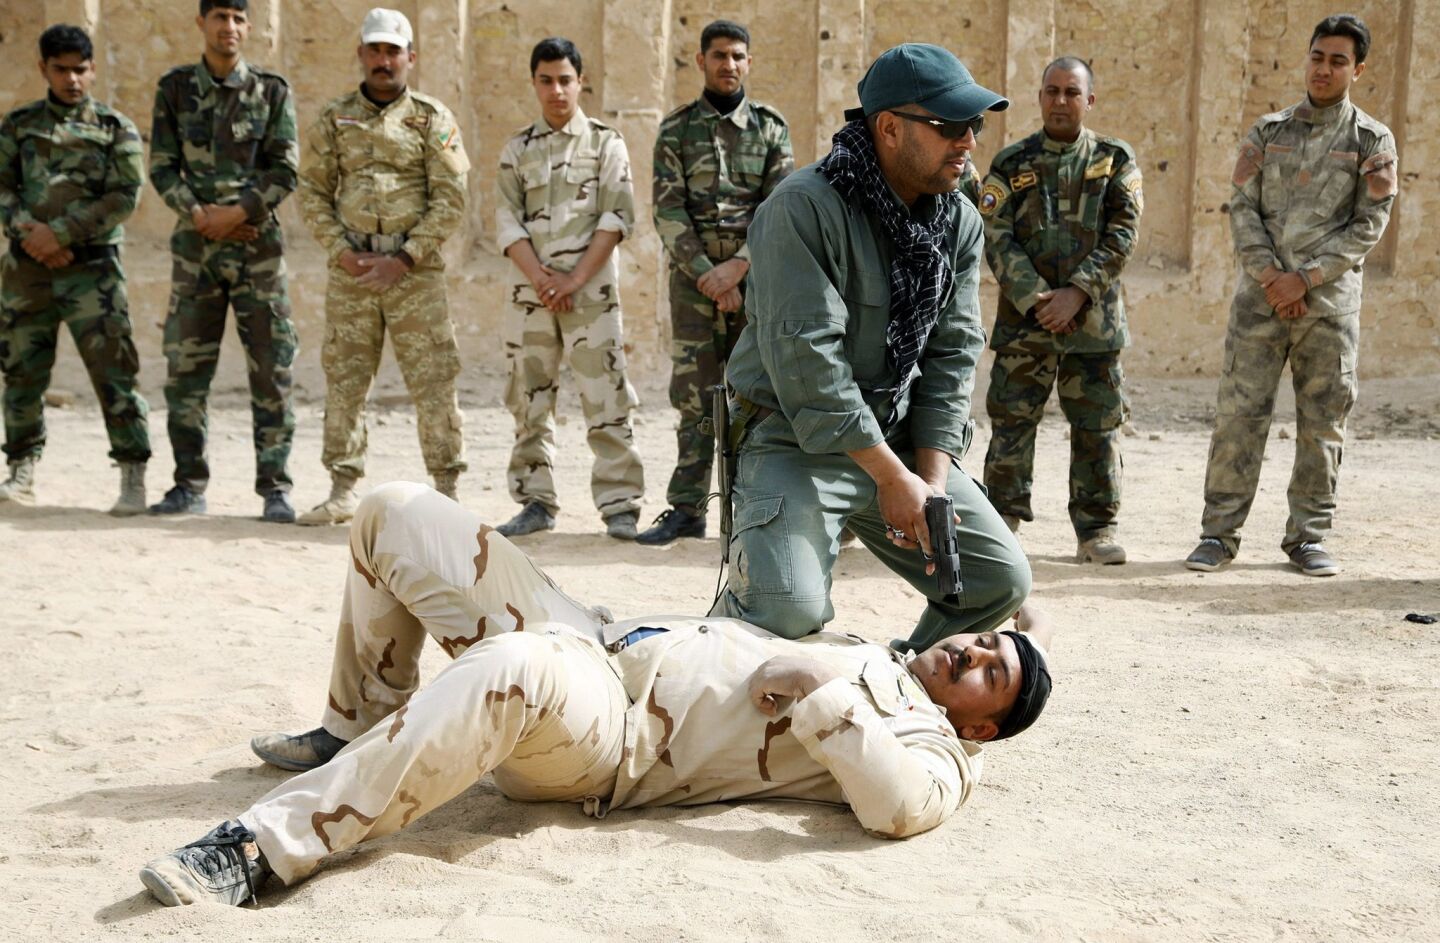 Shiite volunteers receive martial arts training at a military base in Najaf, southern Iraq. Shiite volunteers have been assisting the Iraqi army as it battles fighters from the group calling itself the Islamic State.